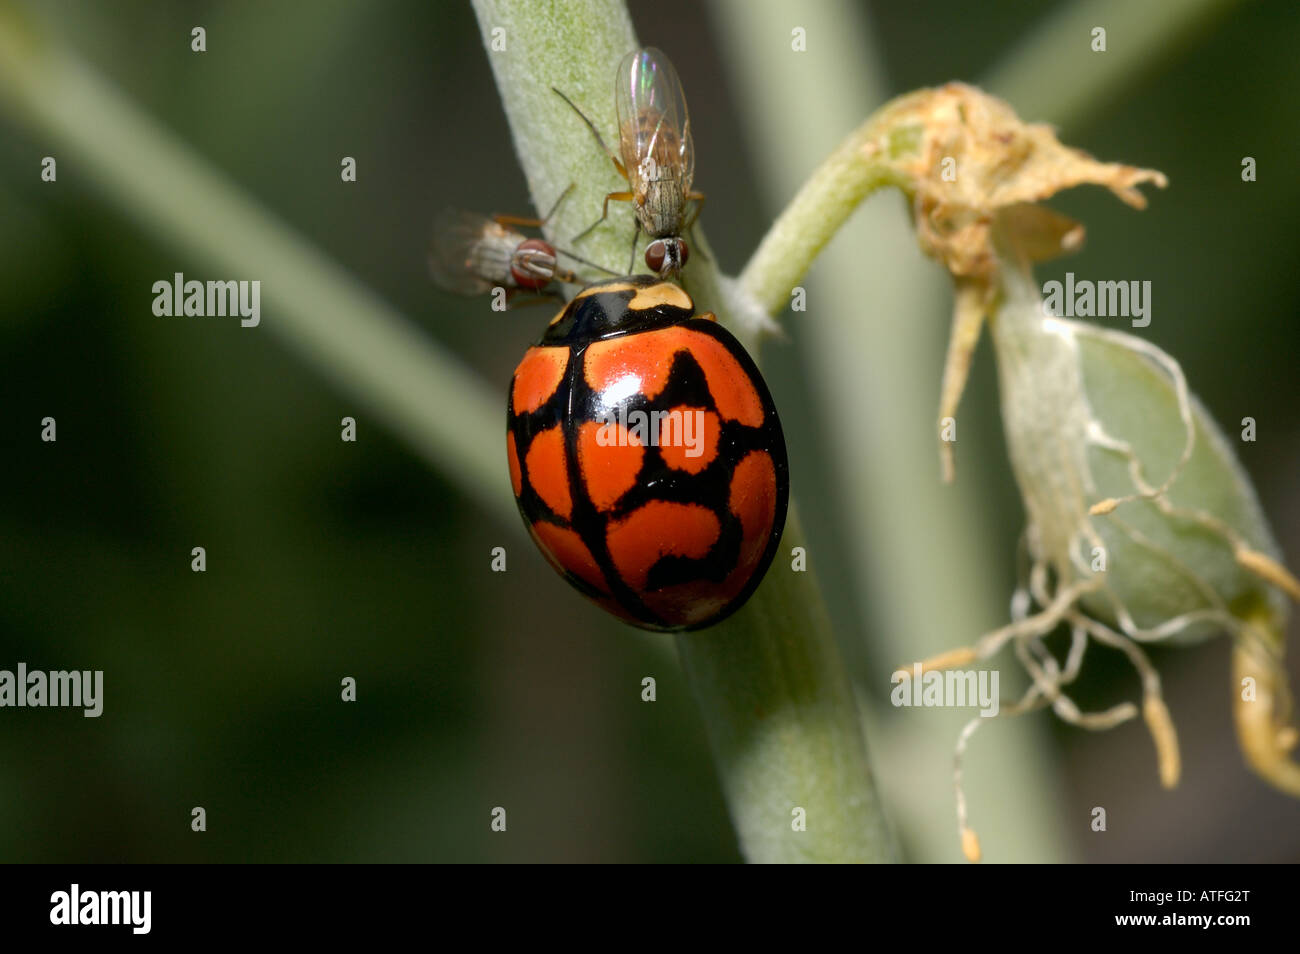 Lunate ladybird Cheilomenes lunata Coccinellidae with two fruit fllies feeding on sap leaking from a plant stem South Africa Stock Photo